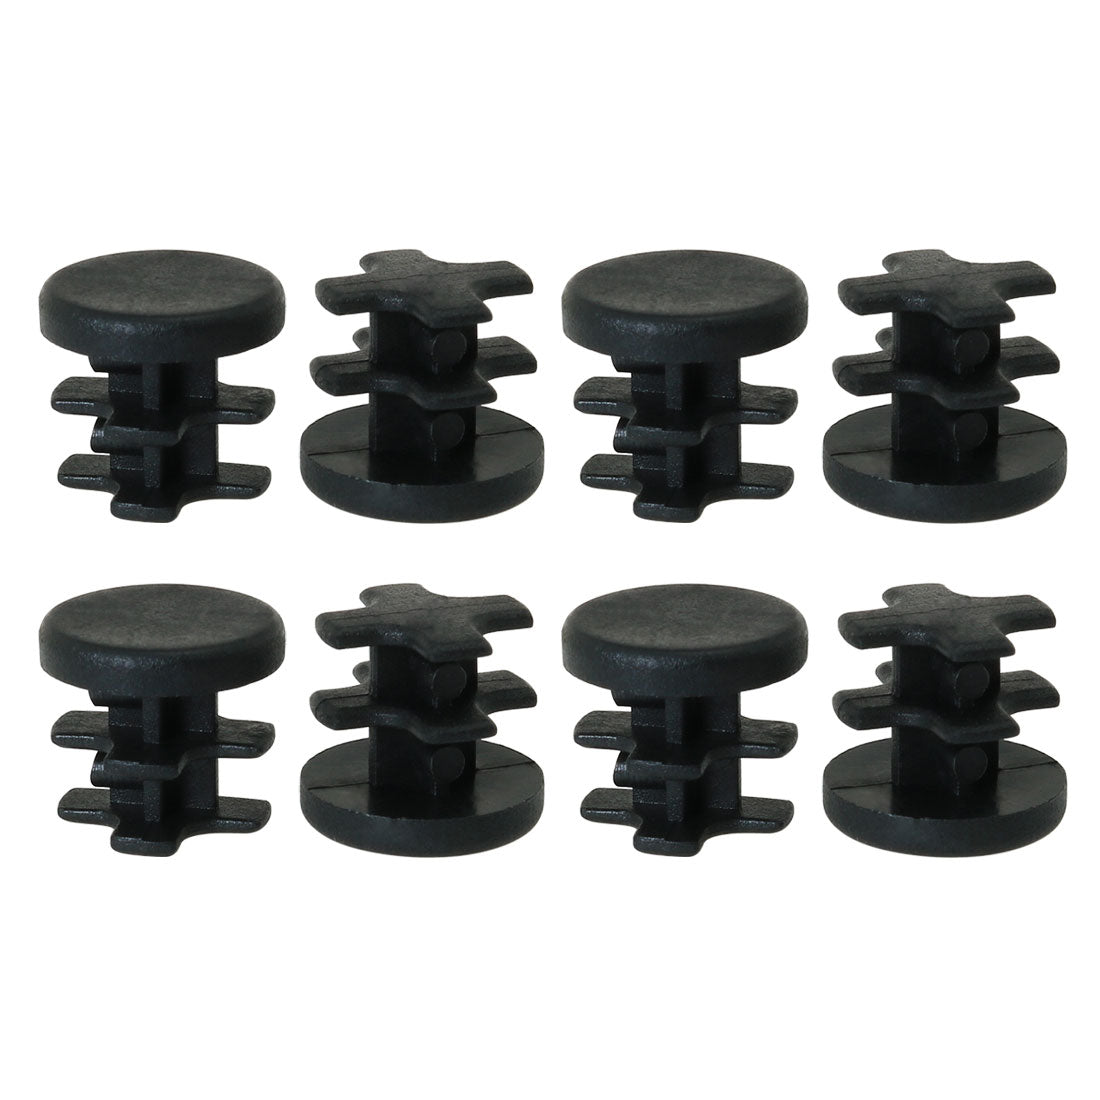 uxcell Uxcell 13mm 0.51" OD Plastic Tube Inserts Pipe End Covers Caps 8pcs, 0.4"-0.47" Inner Dia, for Furniture Chair Table Eqpt Legs